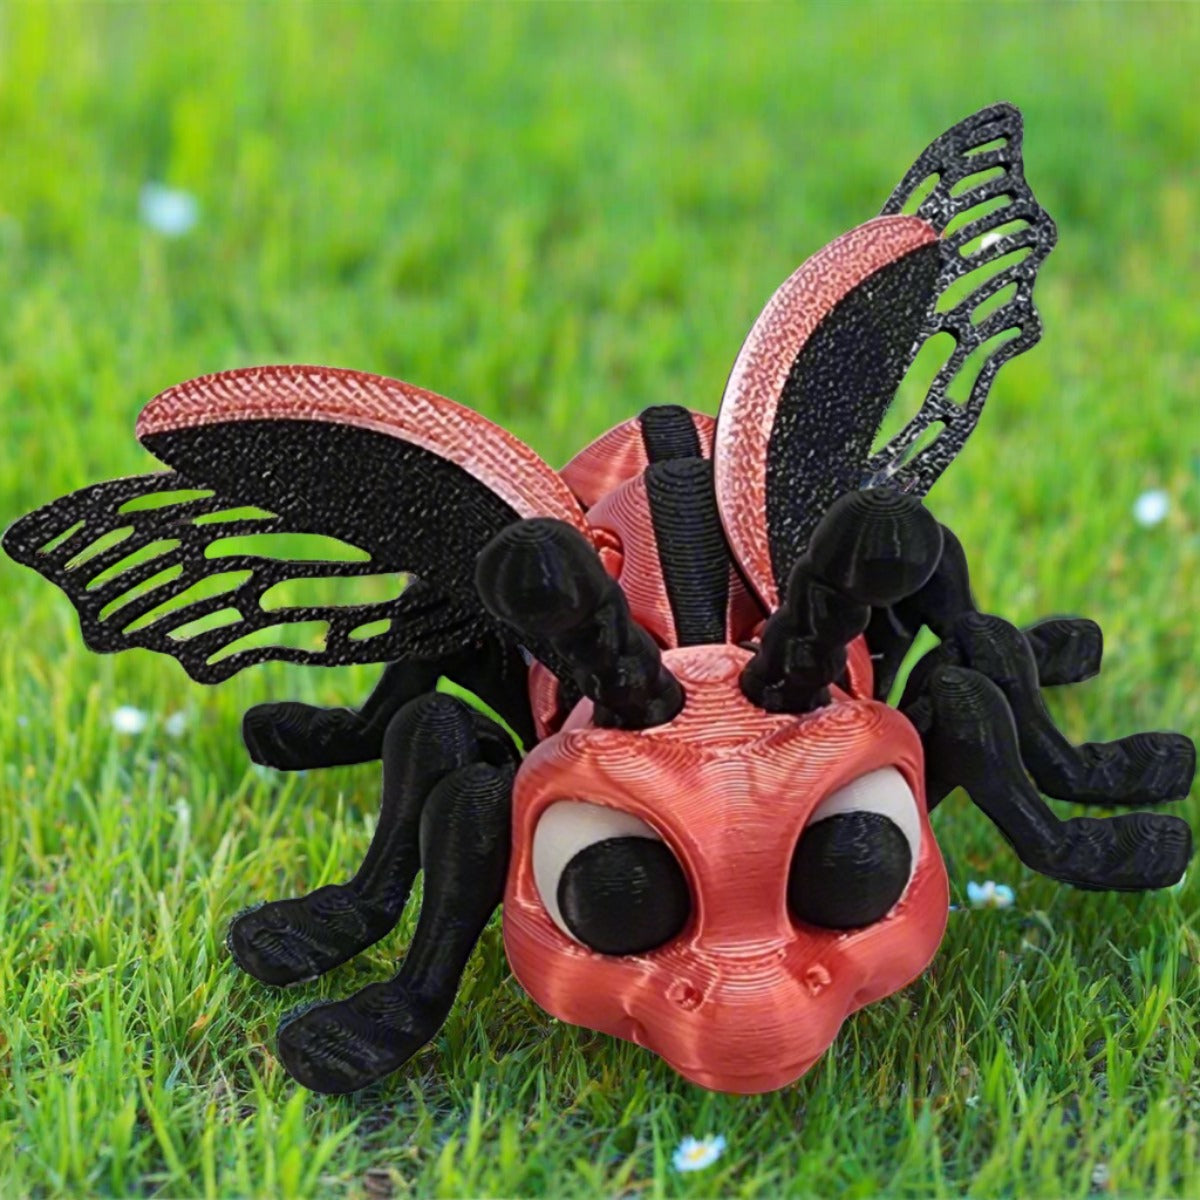 Sparky the FireFly feature intricate designs and bright colors 3D Print - Hats Signs Patches 3D printing Engraving